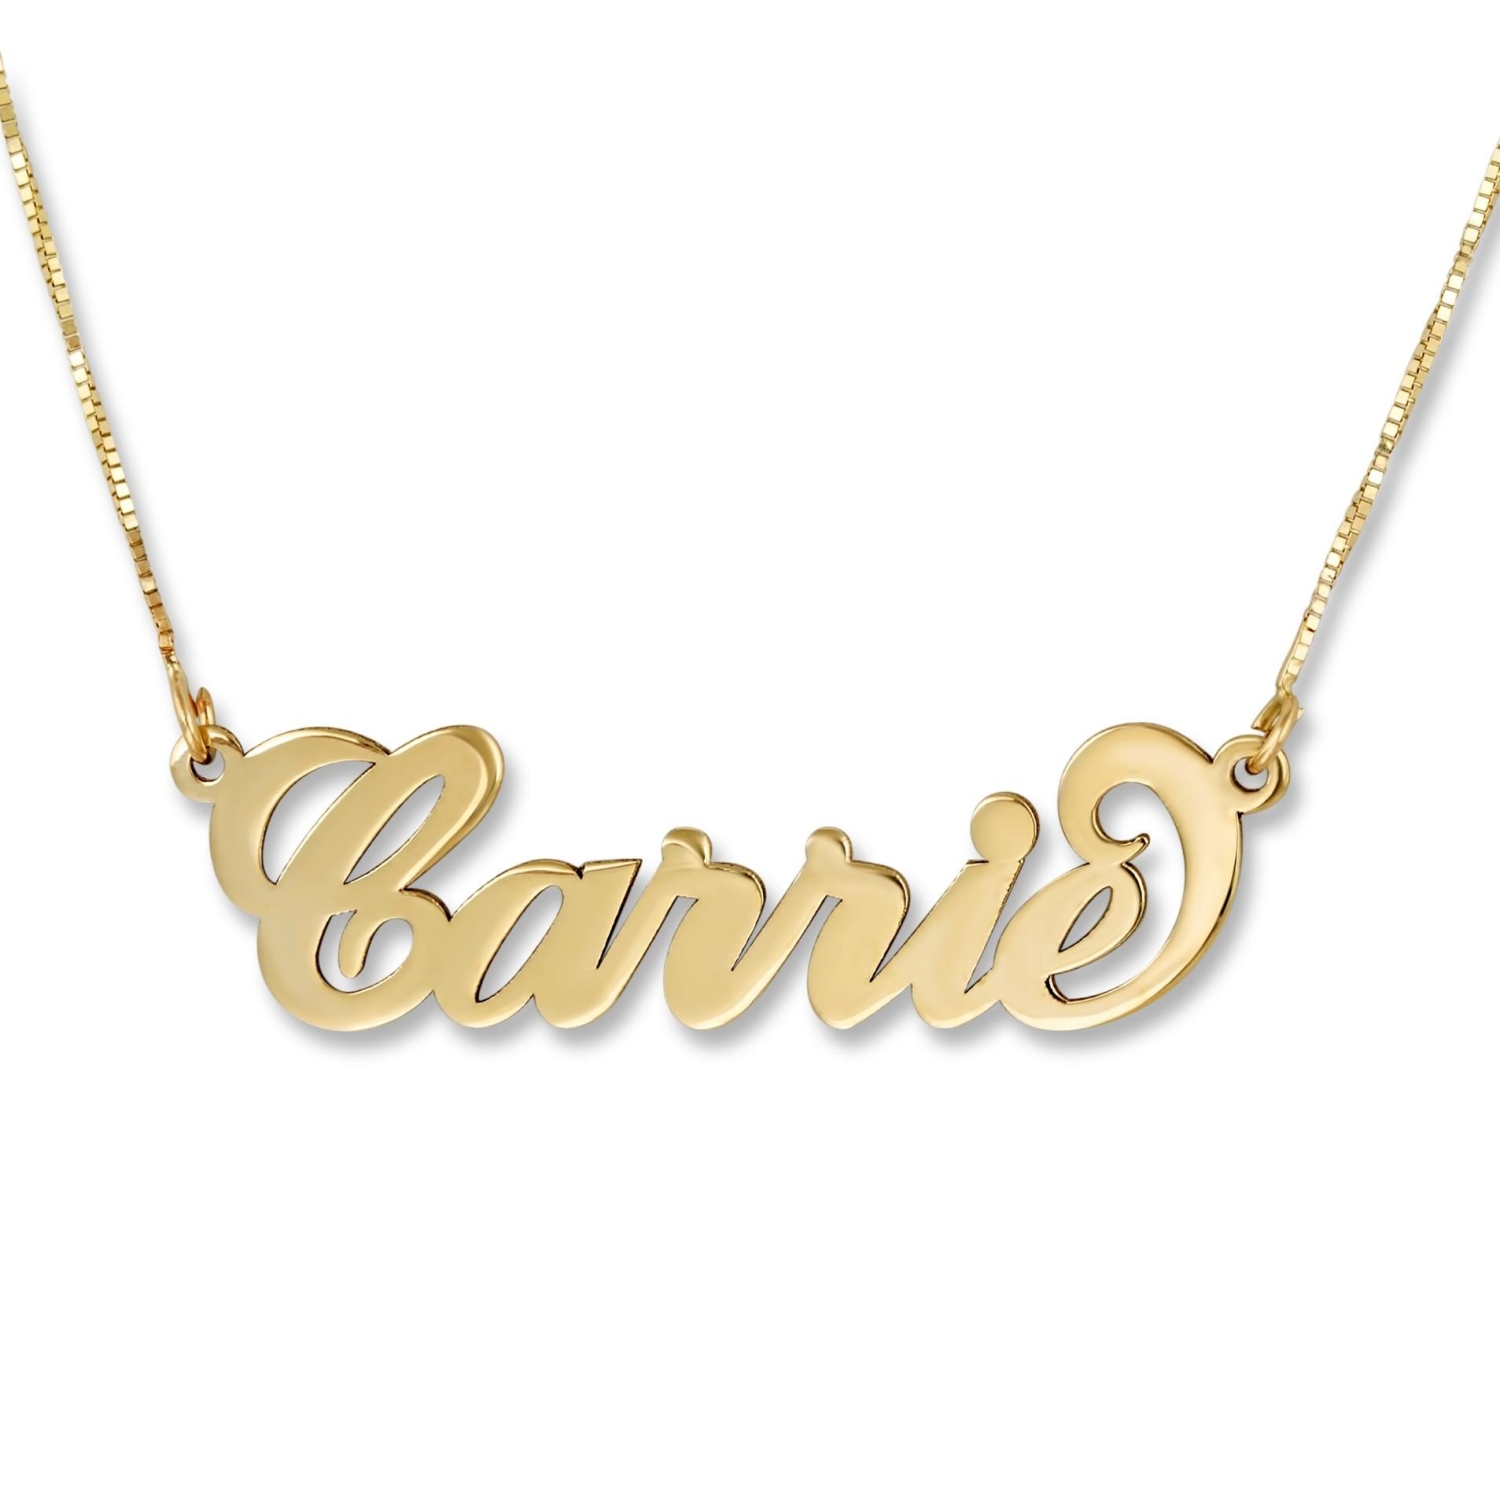 24K Gold Plated Silver Name Necklace in English - (Carrie Script) - 3